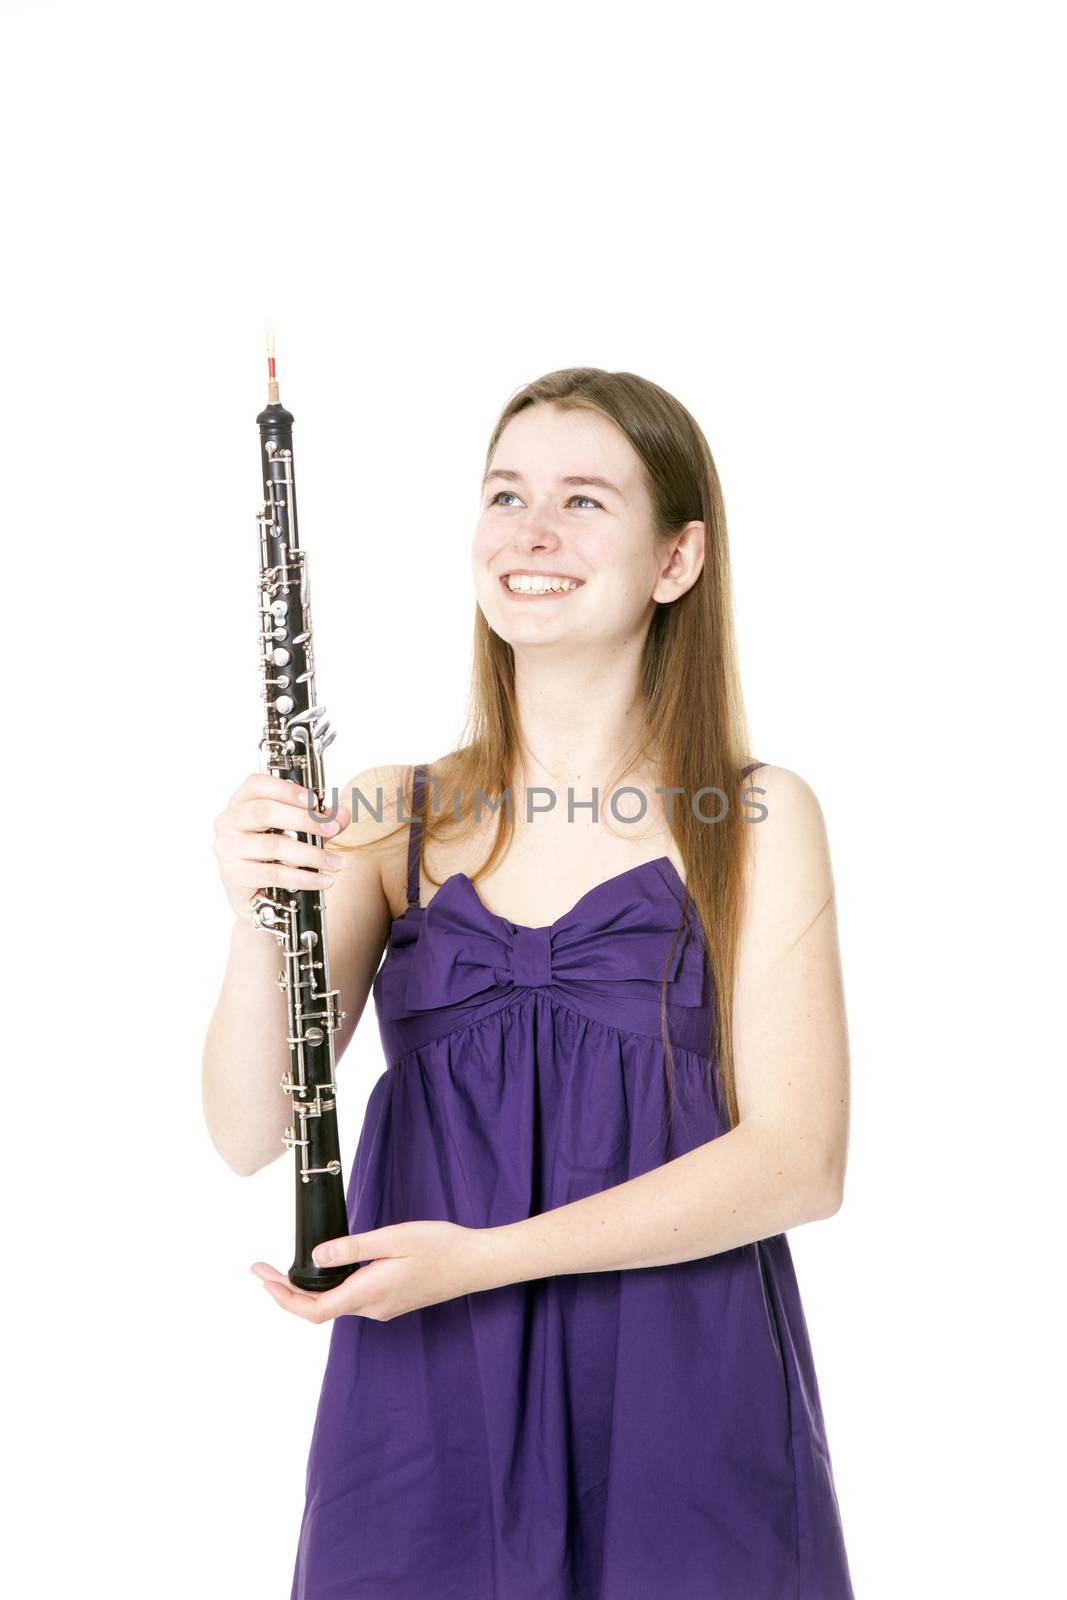 smiling girl in purple dress with oboe against white background